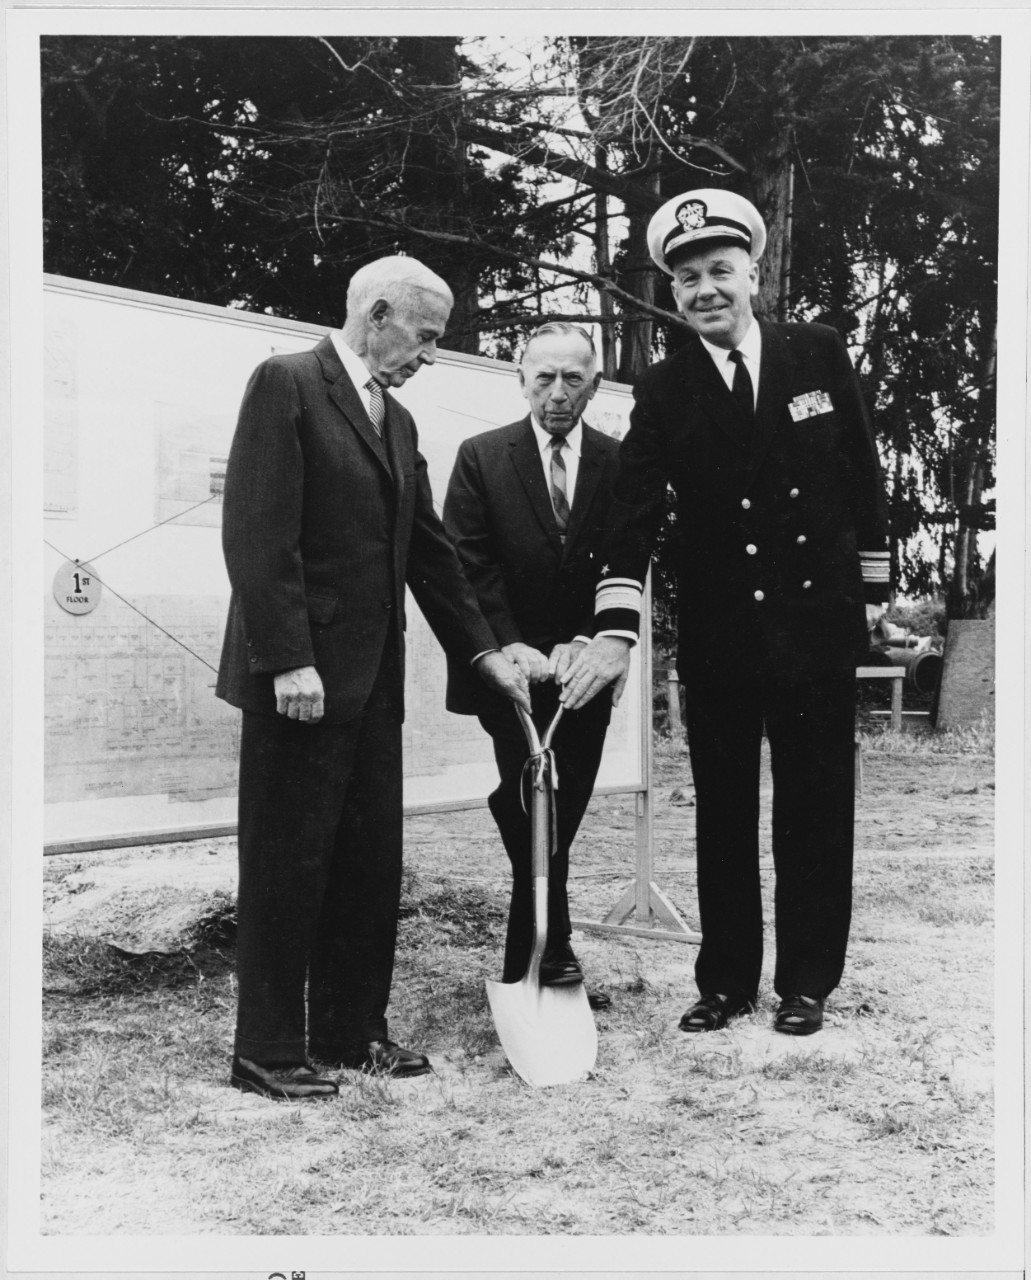 Ground breaking at the Naval Postgraduate School, Admiral Royal Eason Ingersoll, Admiral Raymond A. Spruance, Rear Admiral E.J. O'Donnell